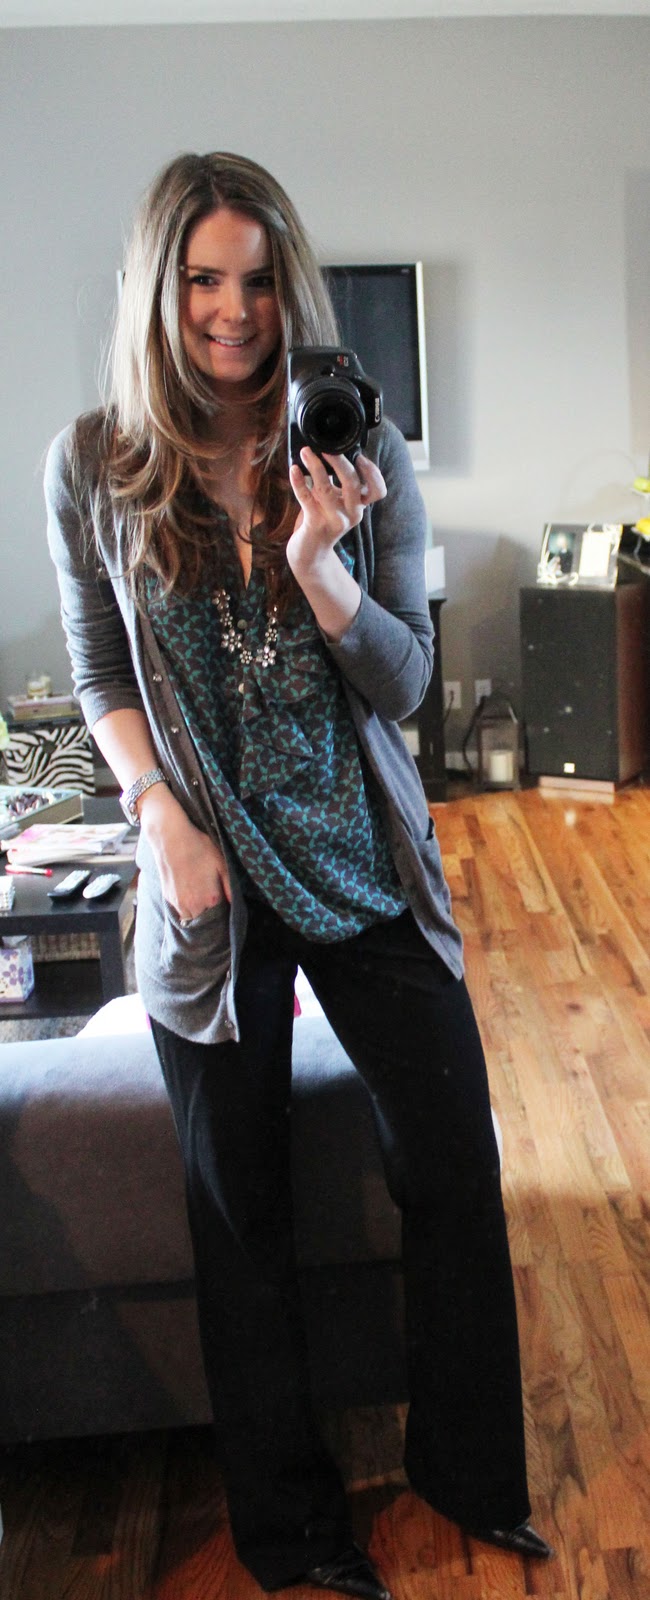 OOTD: Pants Again (Express Editors are Seriously the Best Dress Pants Ever)  - Veronika's Blushing